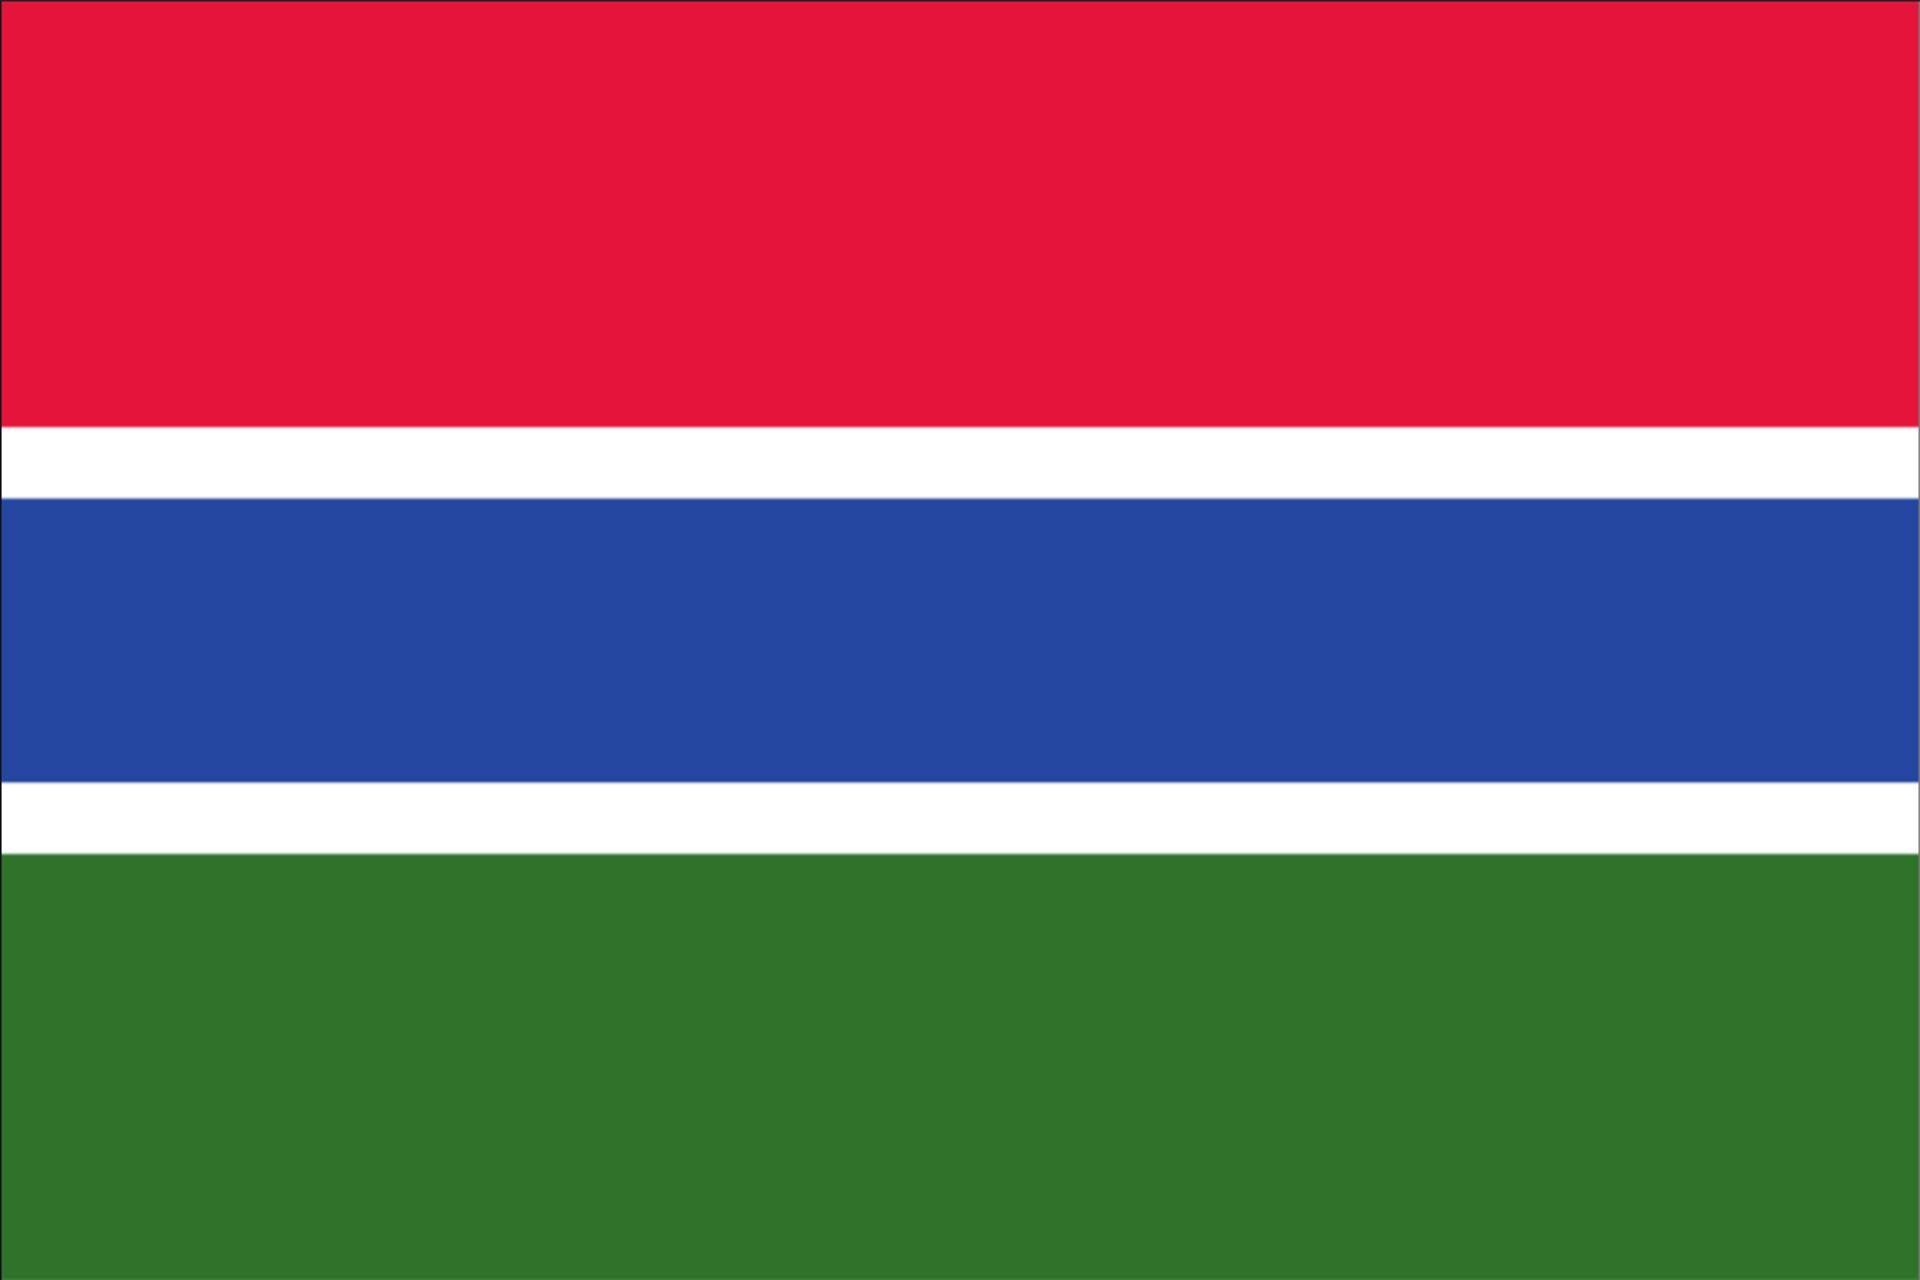 Flagge 80 flaggenmeer Gambia g/m²